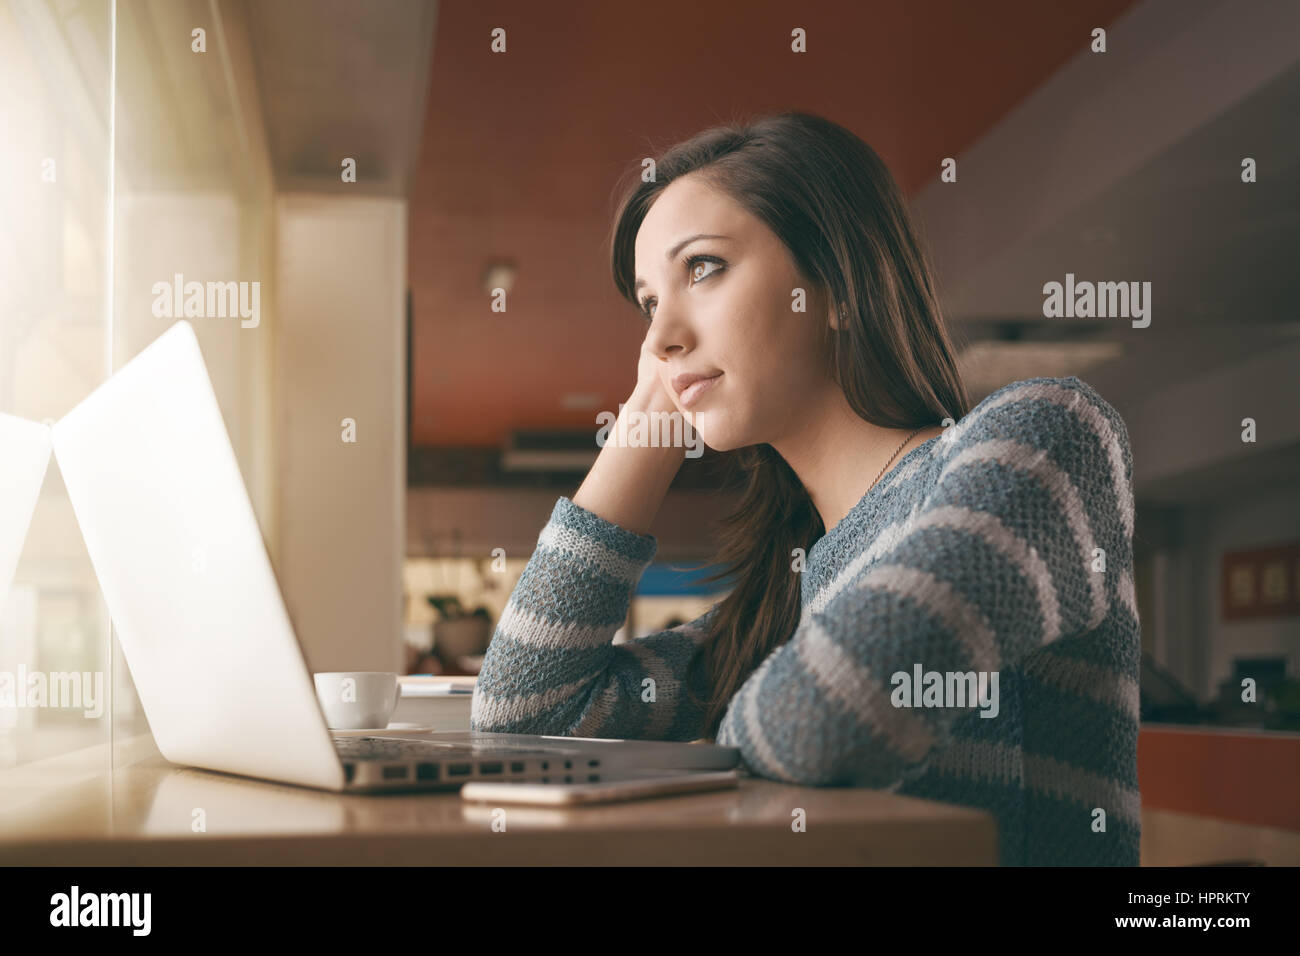 Teenager young girl using a laptop next to a window Stock Photo